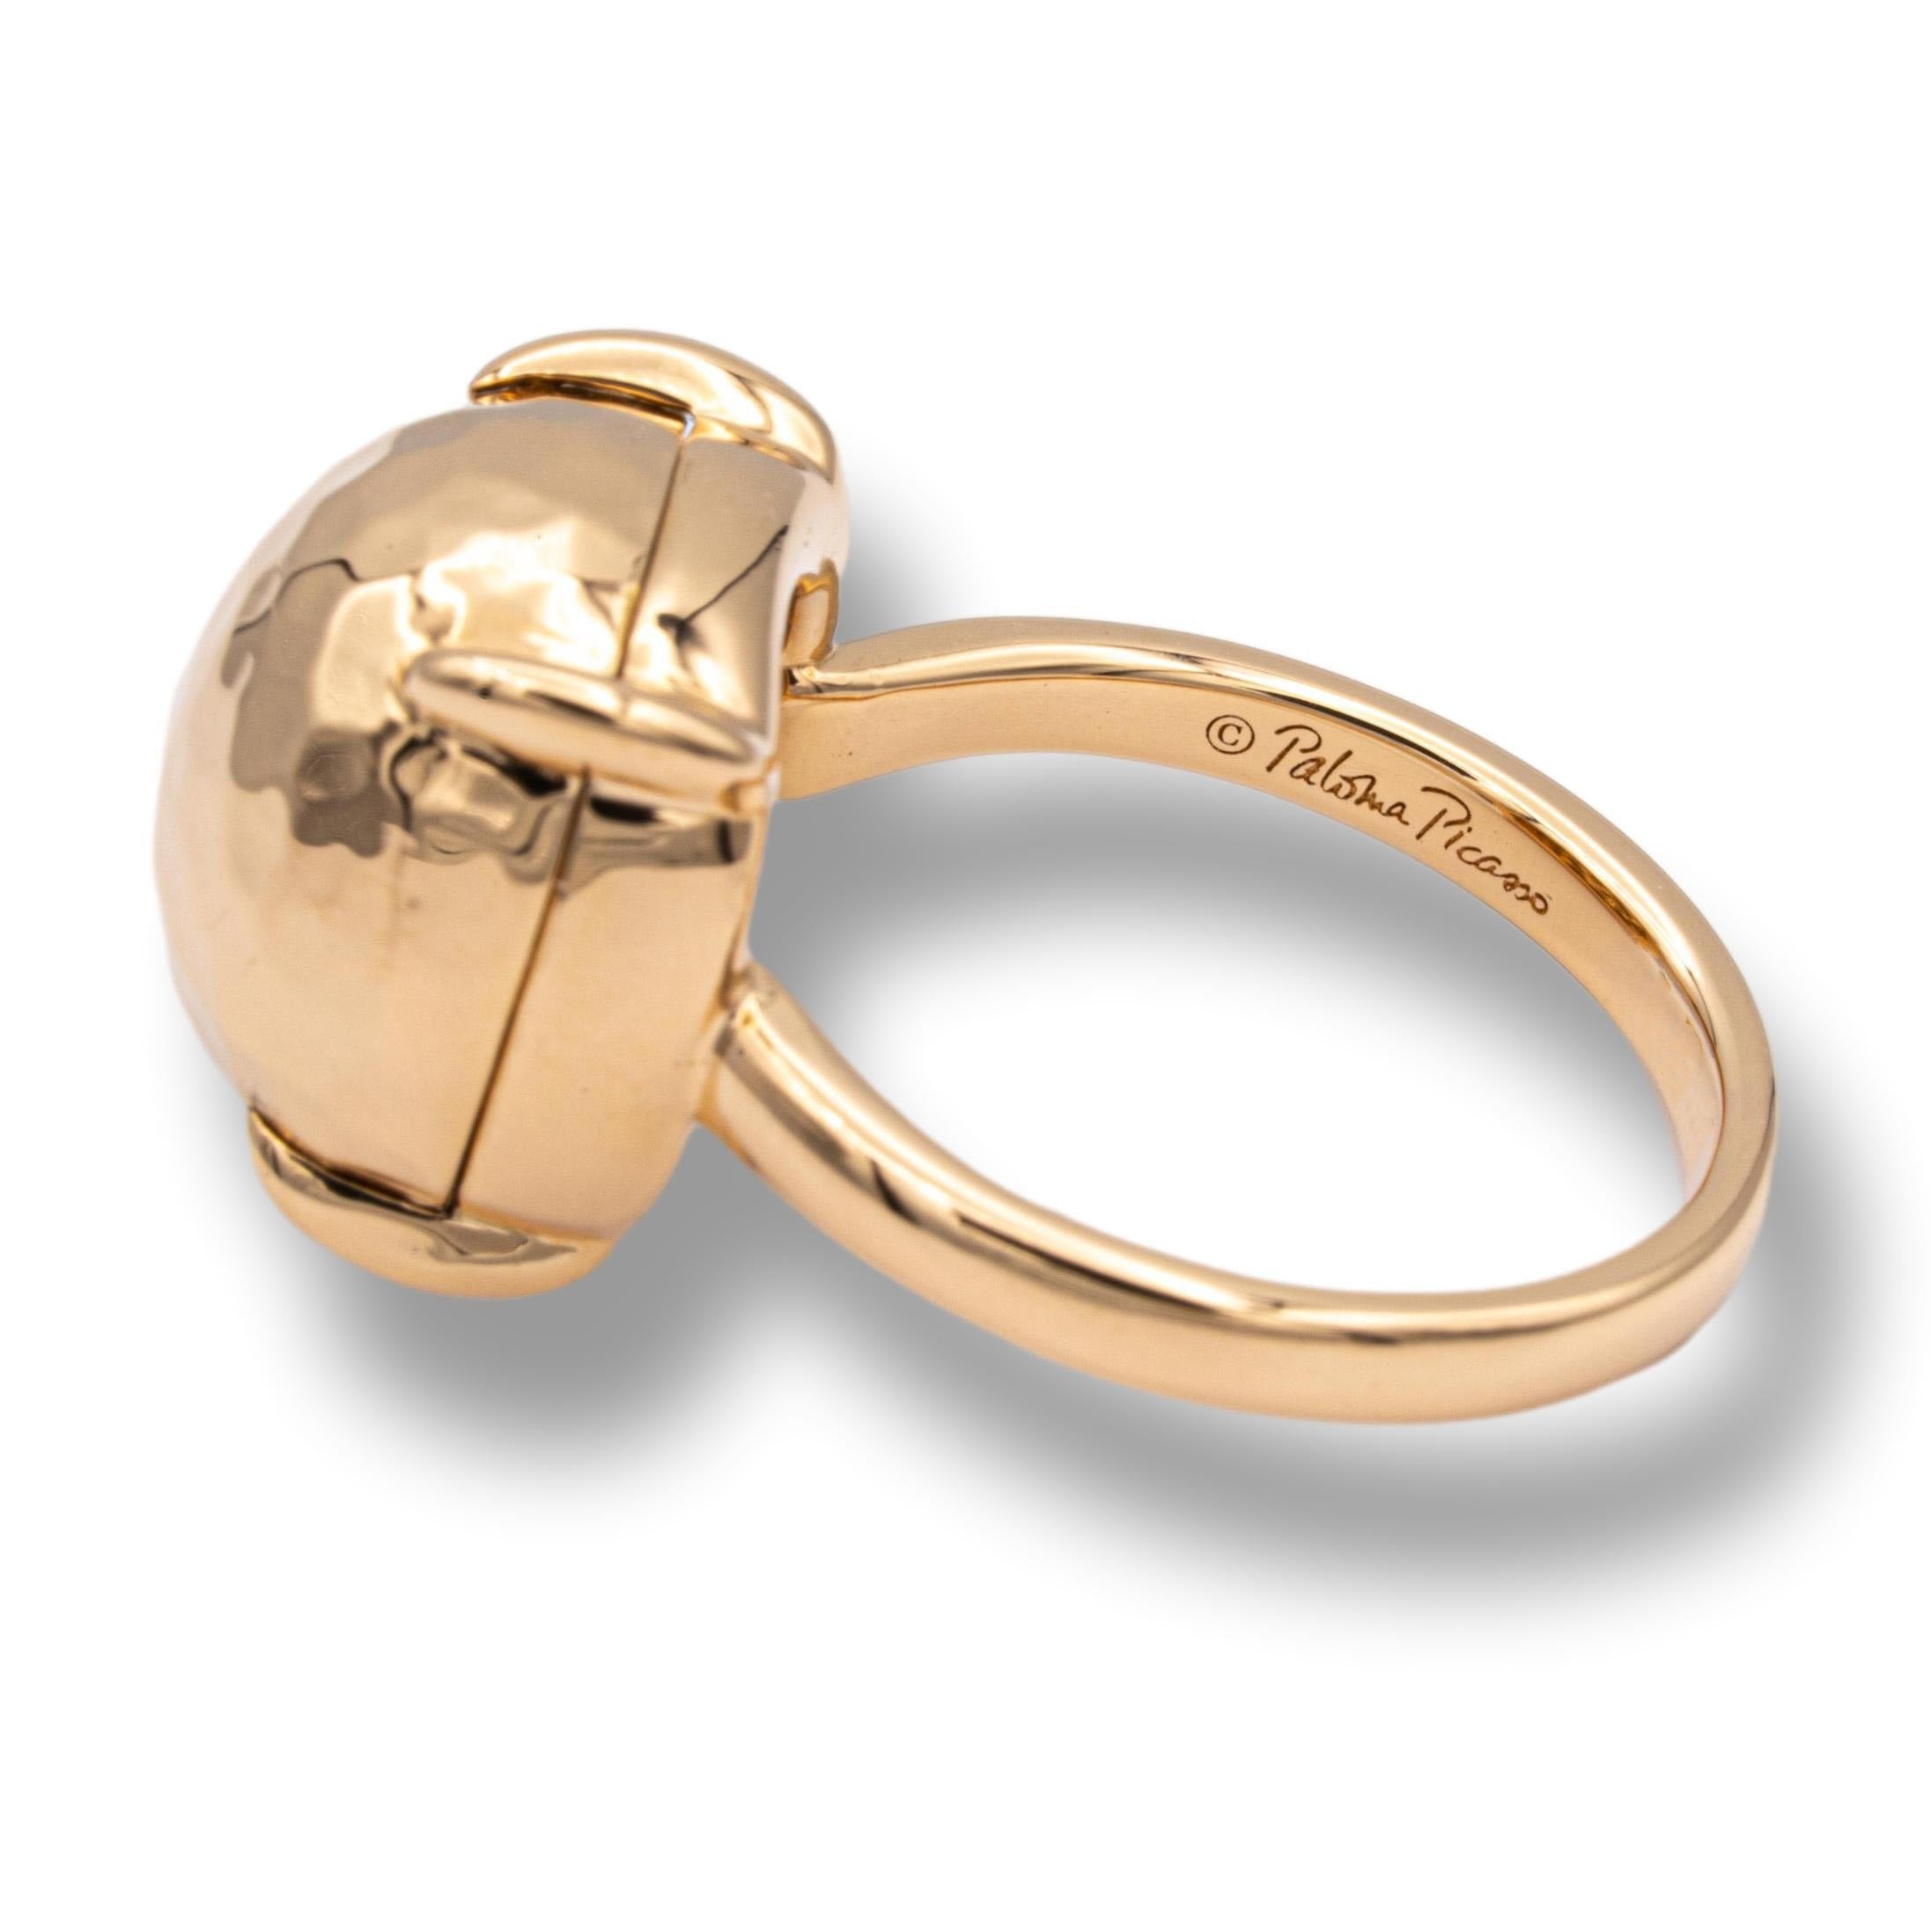 Tiffany & Co. Sugar Stacks Hammered Ring designed by Paloma Picasso finely crafted in 18 Karat rose gold featuring 4 claw prong hammered gold bead set on top of a polished band.

Stamp: T&Co. Paloma Picasso 750
Size: 4.75 (Can be resized)
Weight: